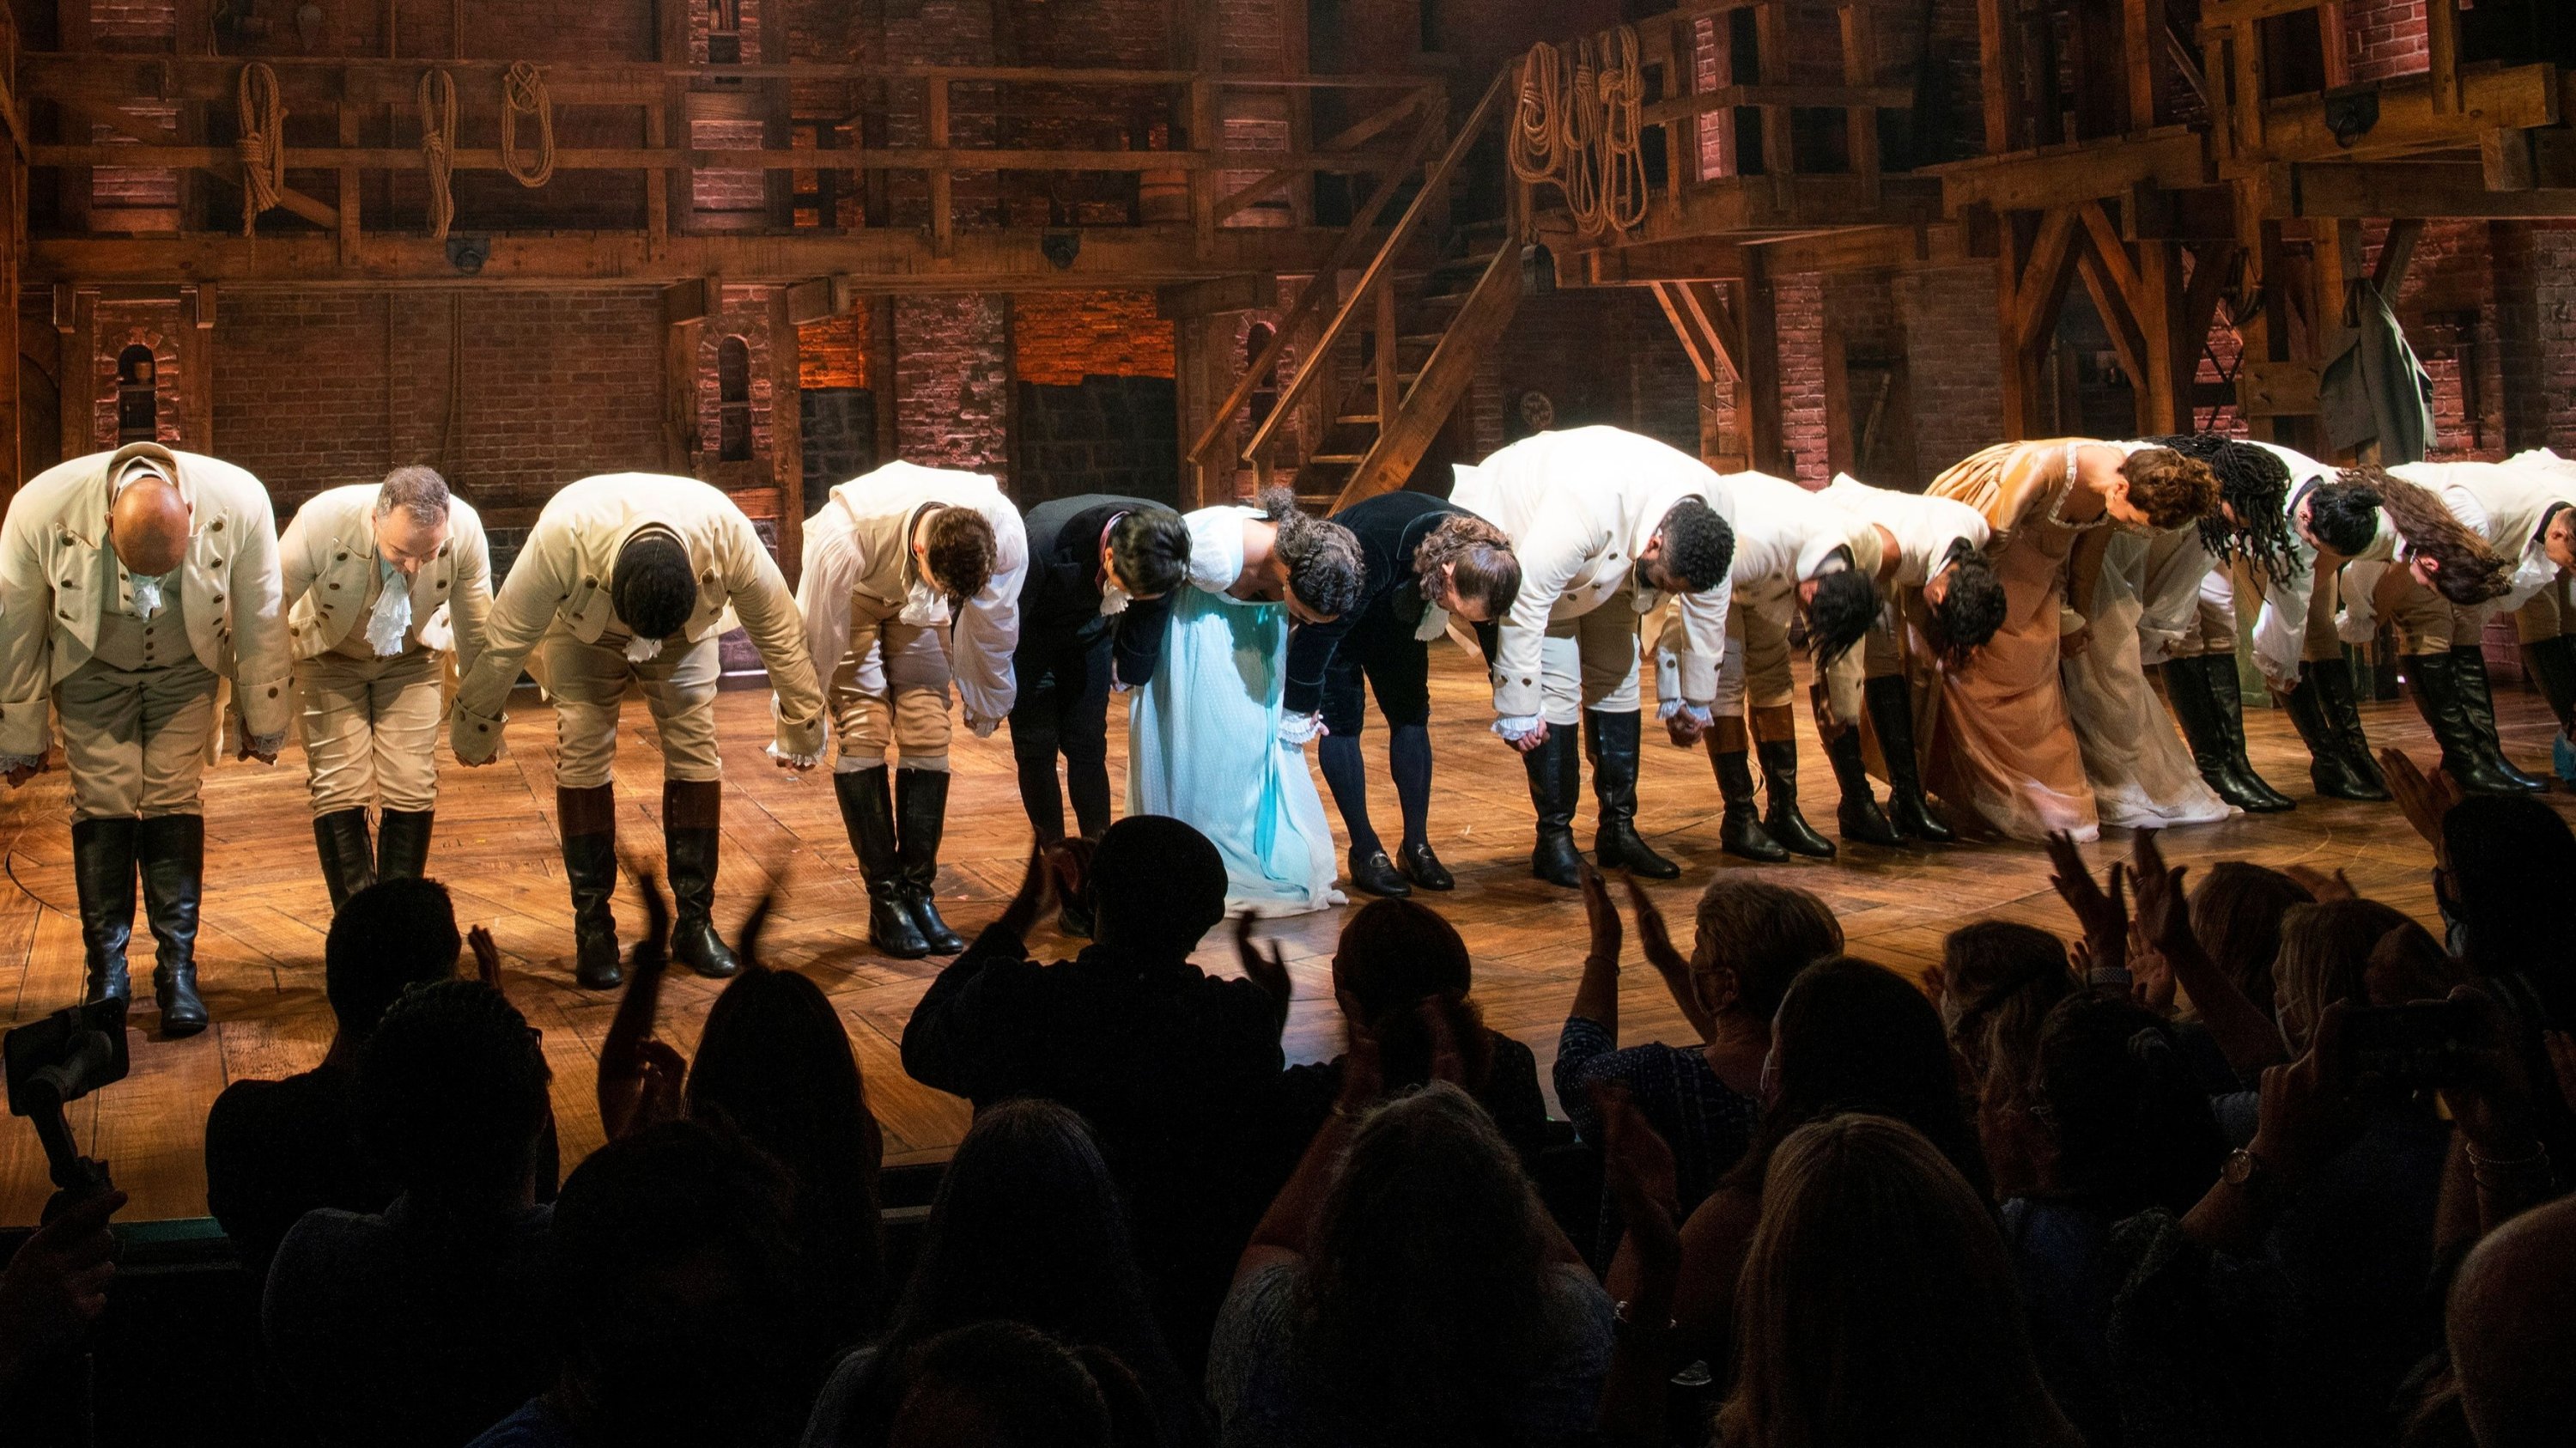 Actors greet the audience at the Richard Rogers theater during curtain call of the first return performance of 'Hamilton' as Broadway shows begin to re-open to live audiences, in Manhattan, New York, U.S., Sept. 14, 2021. (Reuters Photo)